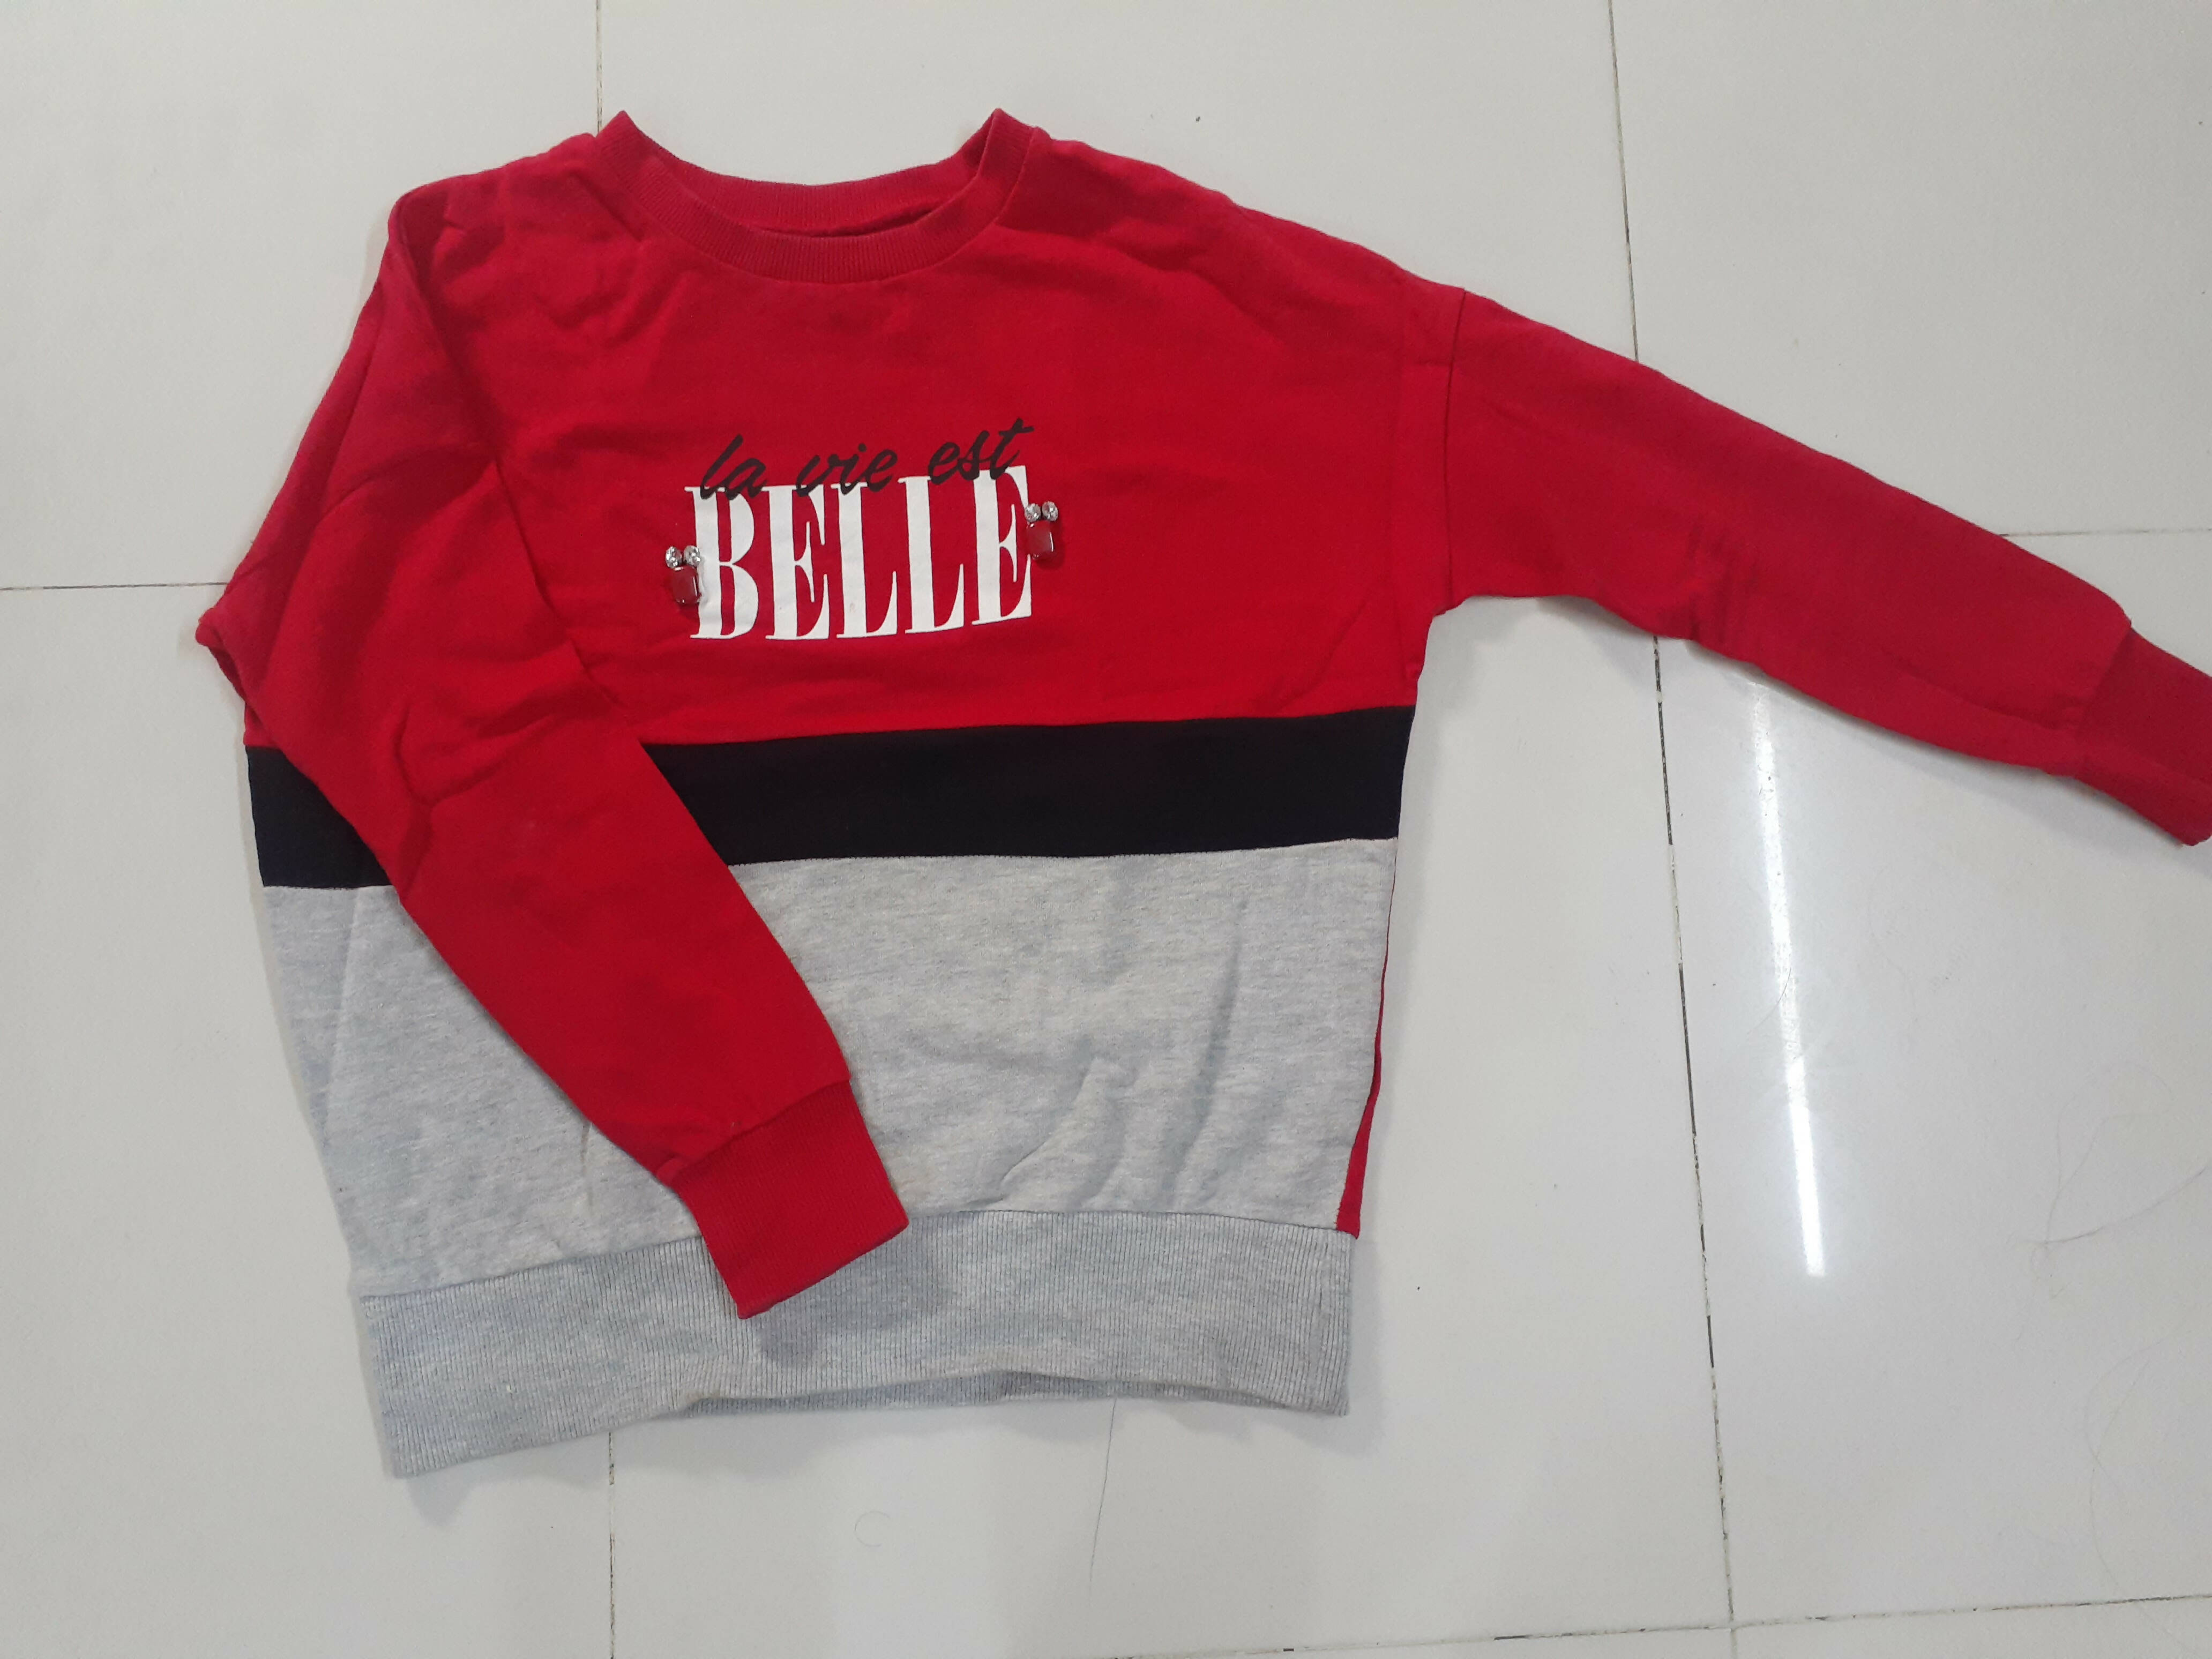 outfitters | warm sweatshirt red white black and gray | girls Tops & Shirts | Preloved